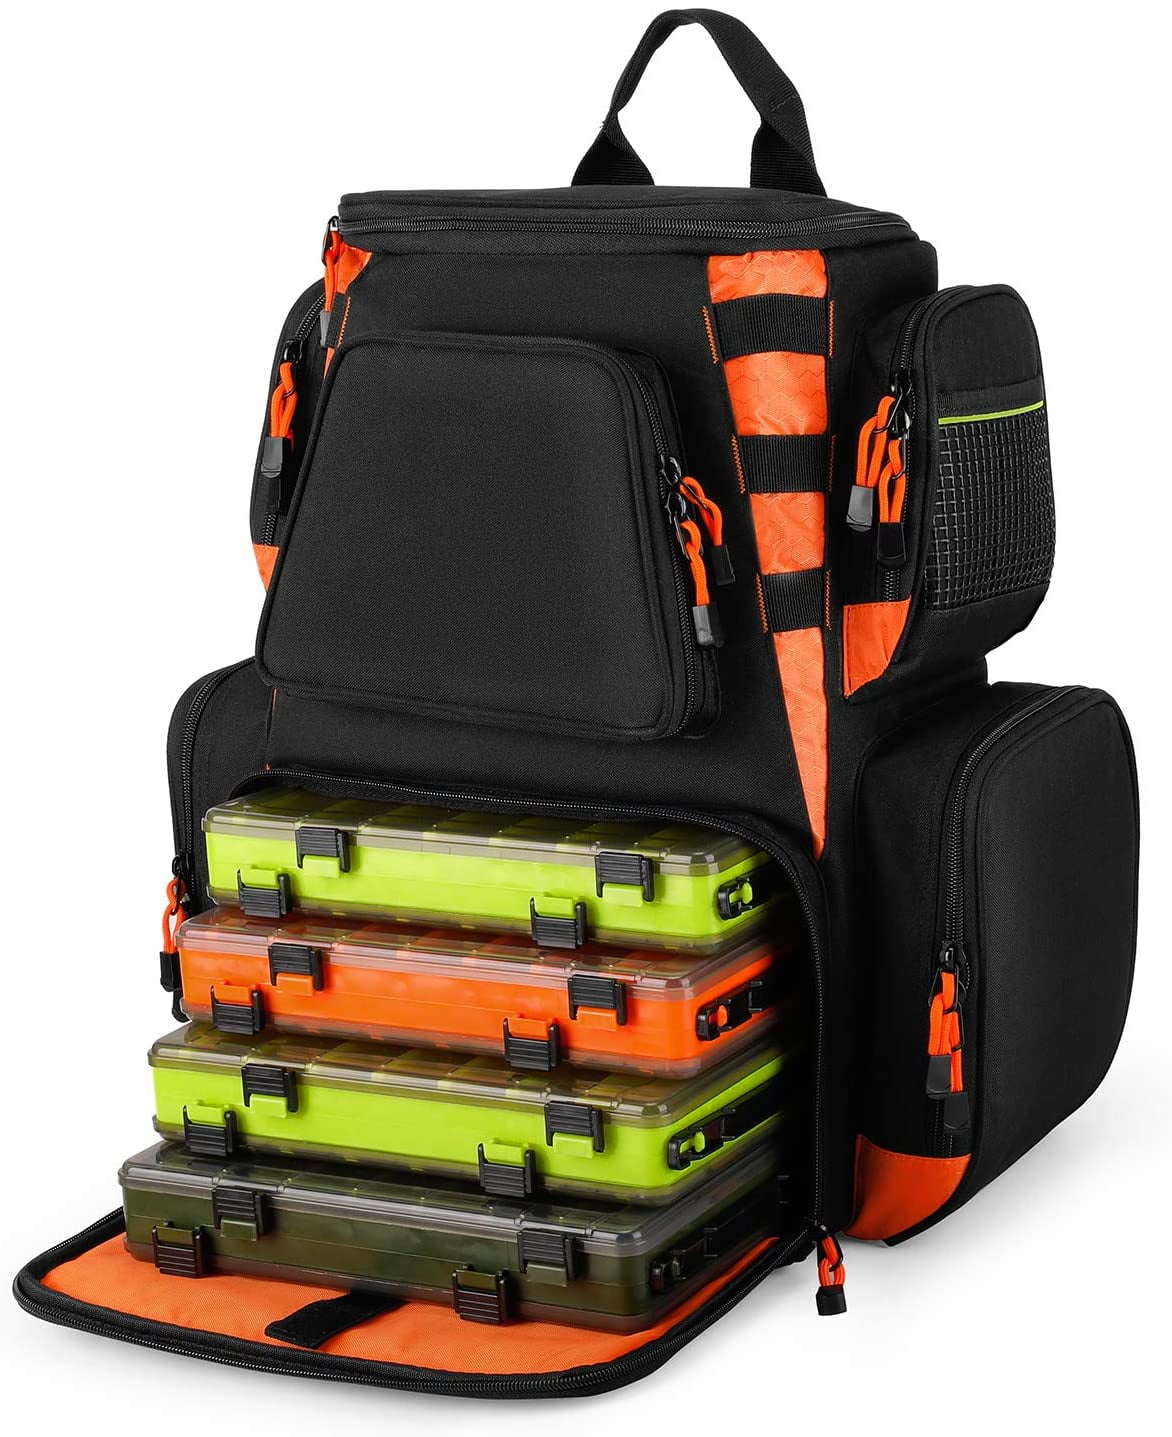 Fishing Tackle Backpack with 4 Trays Tackle Boxes, Storage Bag 25L Water  Resistant with 2 Rod Holders and Protective Rain Cover (Black and Orange) 